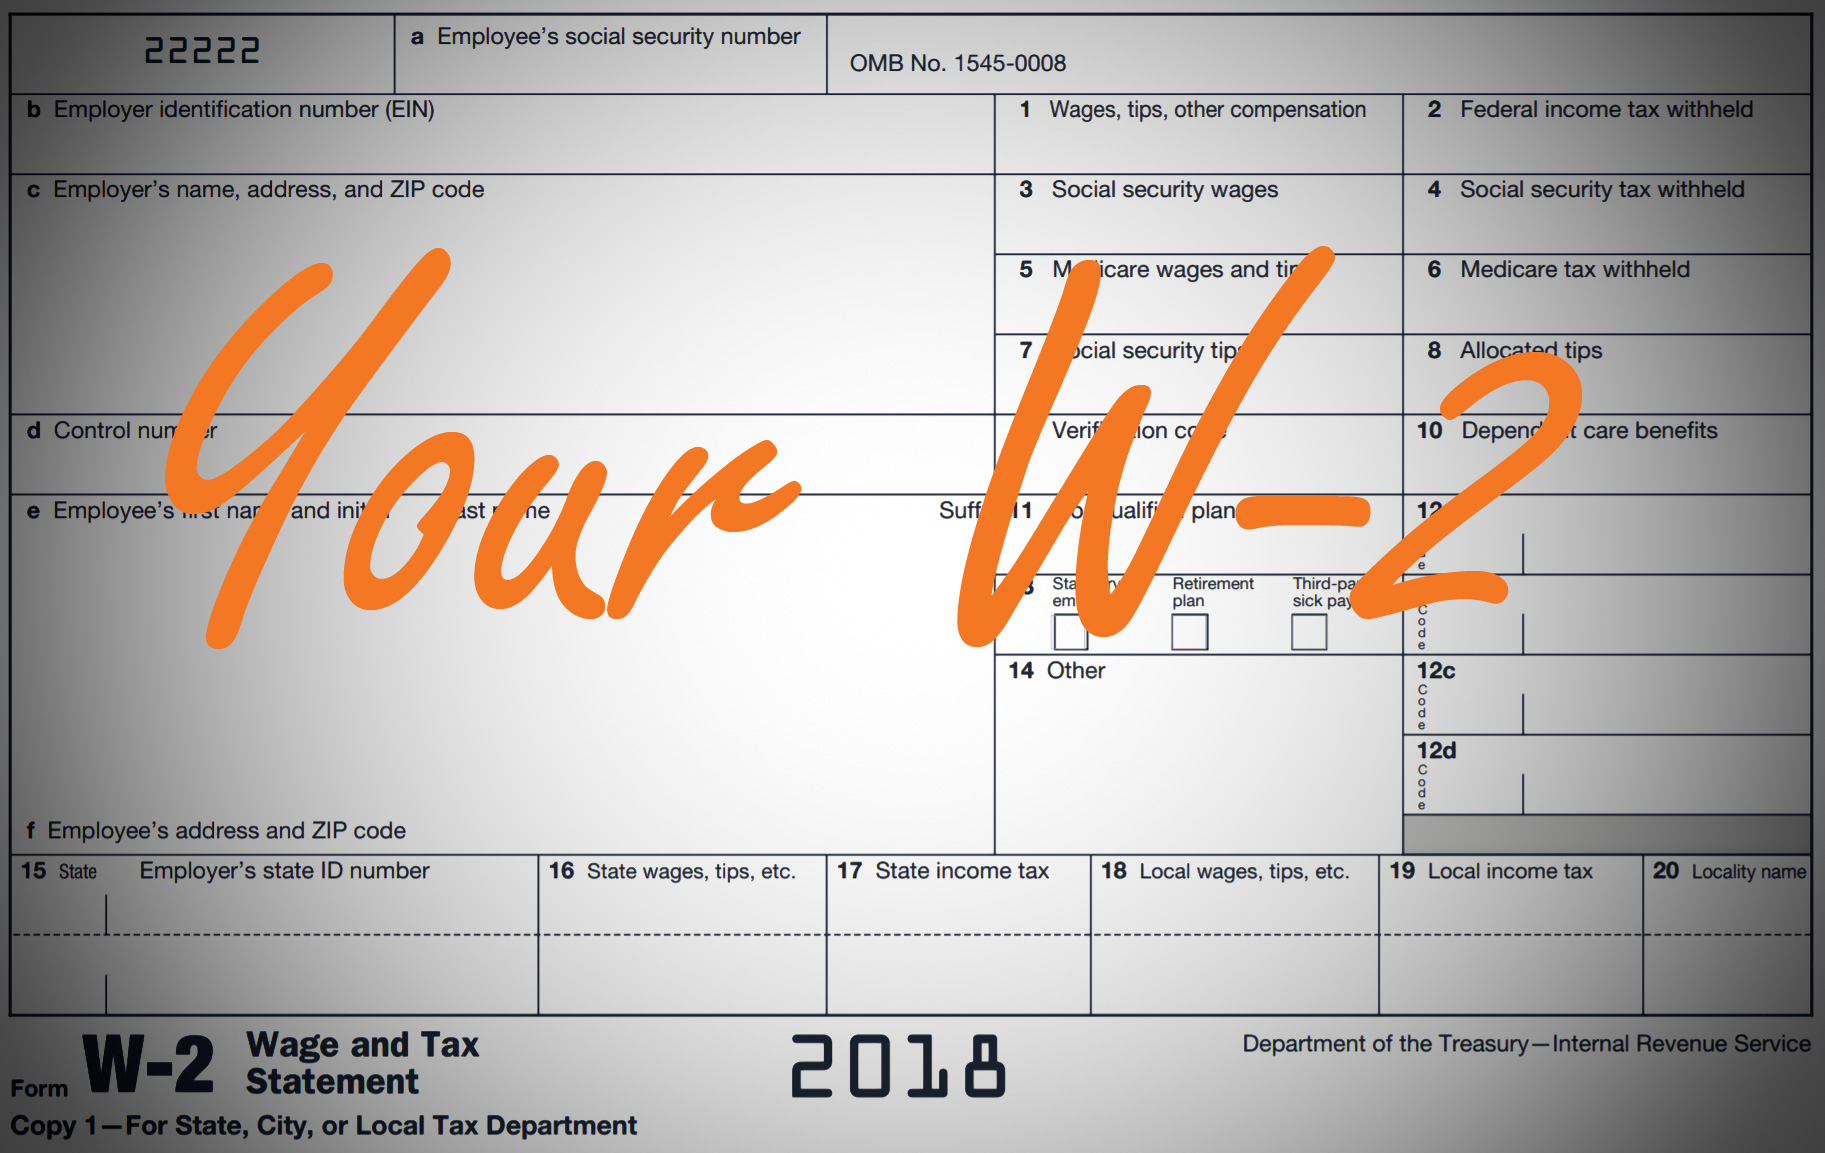 Get Educated: Learn How To Read Your W-2 for W2 Form Locality Name